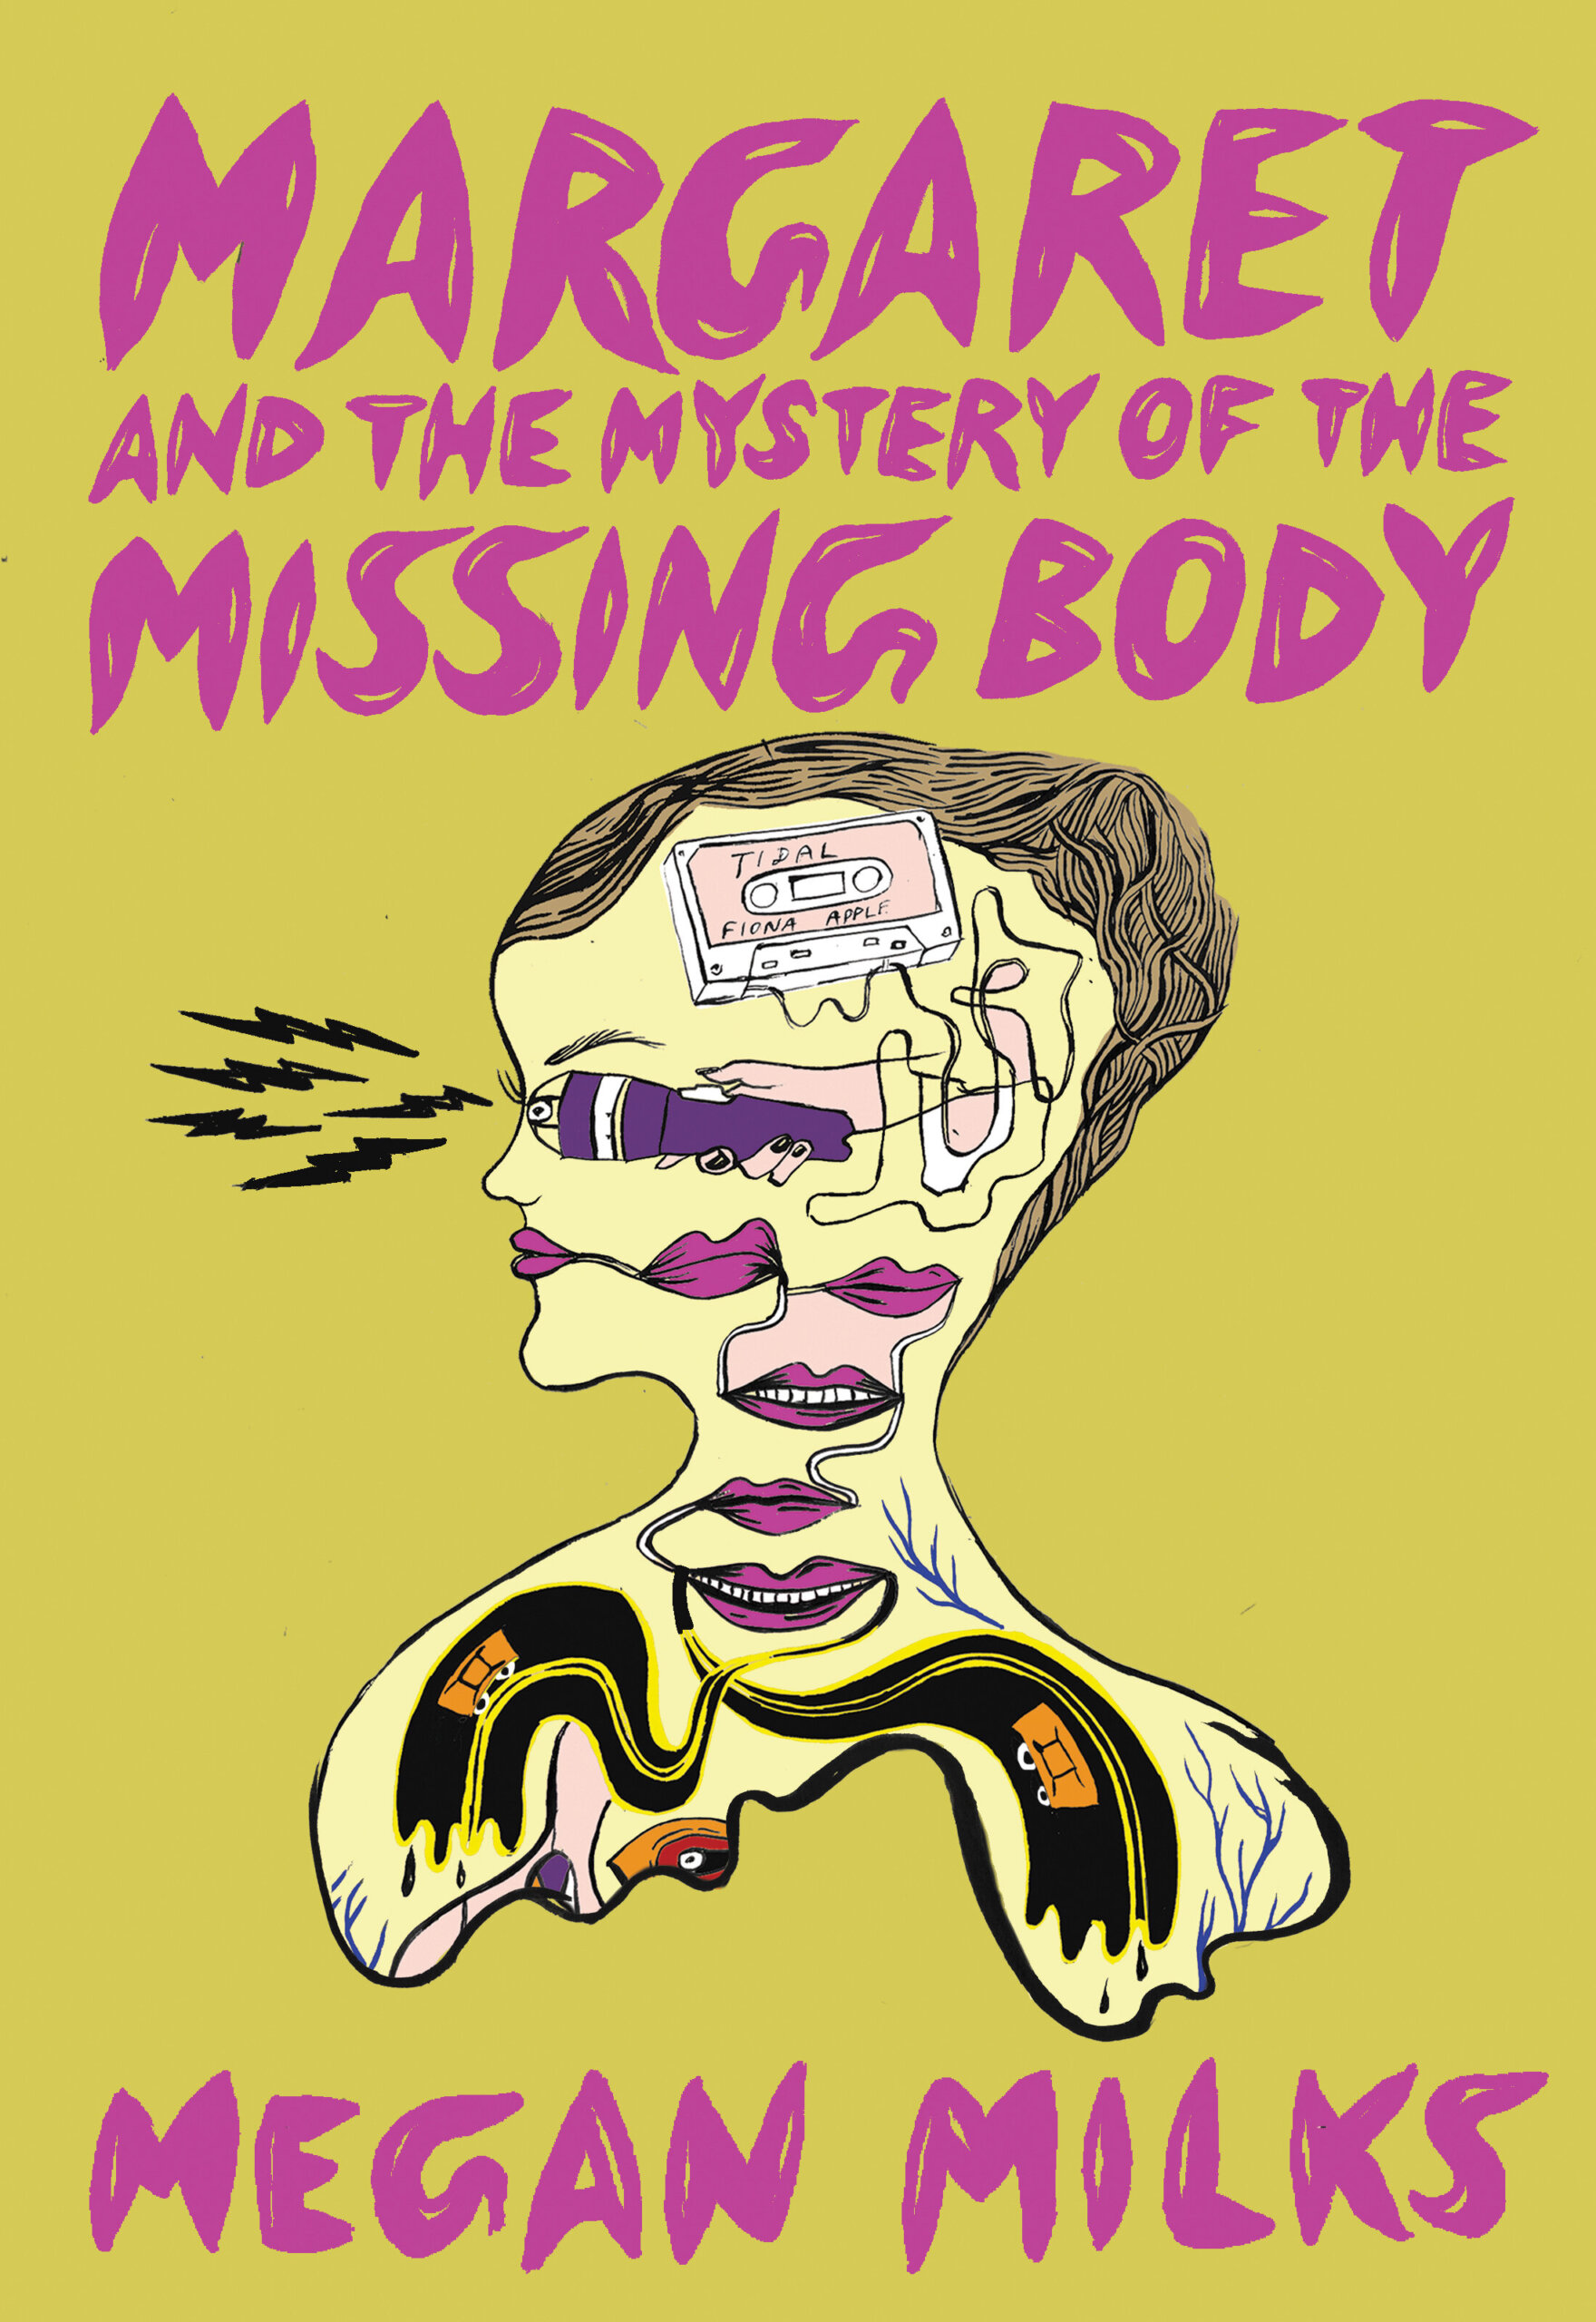 Cover of “Margaret and the Mystery of the Missing Body" by Megan Milks